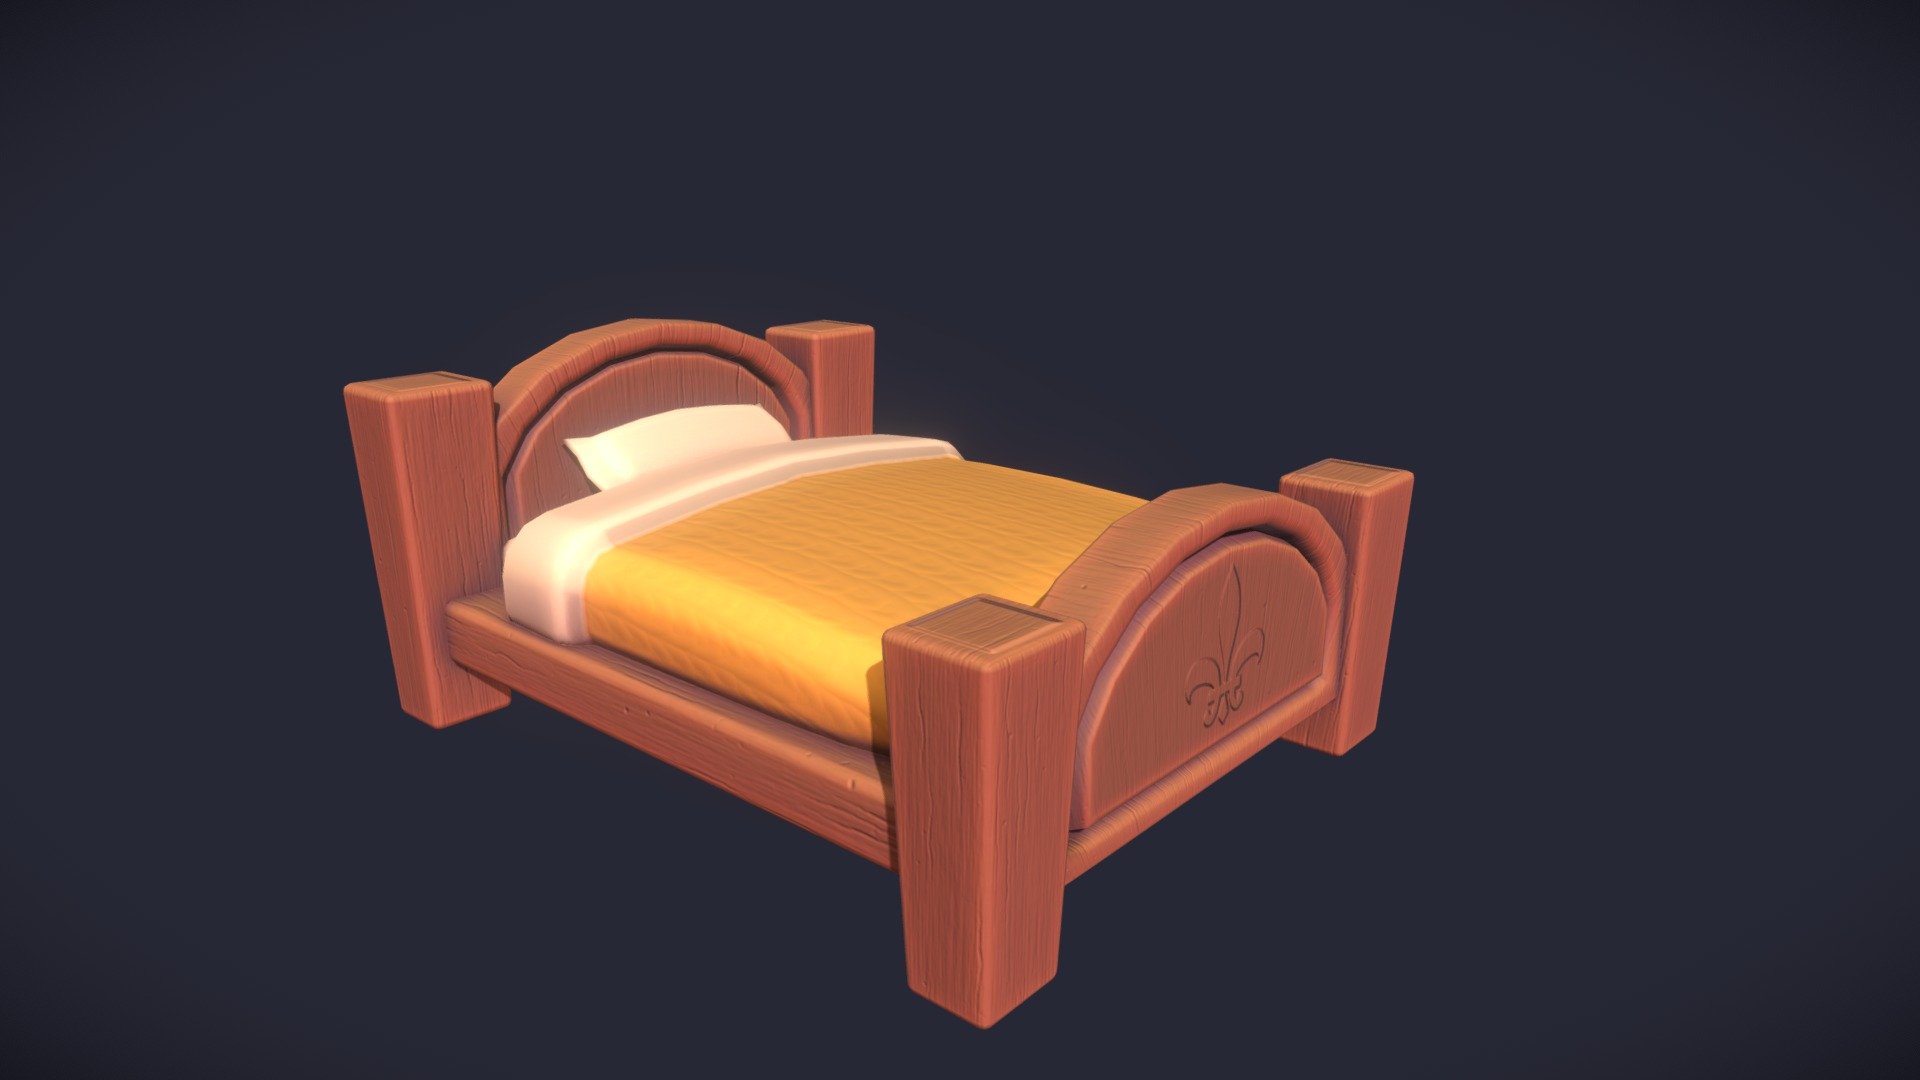 Here is new version of the stylized bed that I created before. In this one I improved the textures and added more details. The model is created in Maya and textured in Substance Painter 3d model